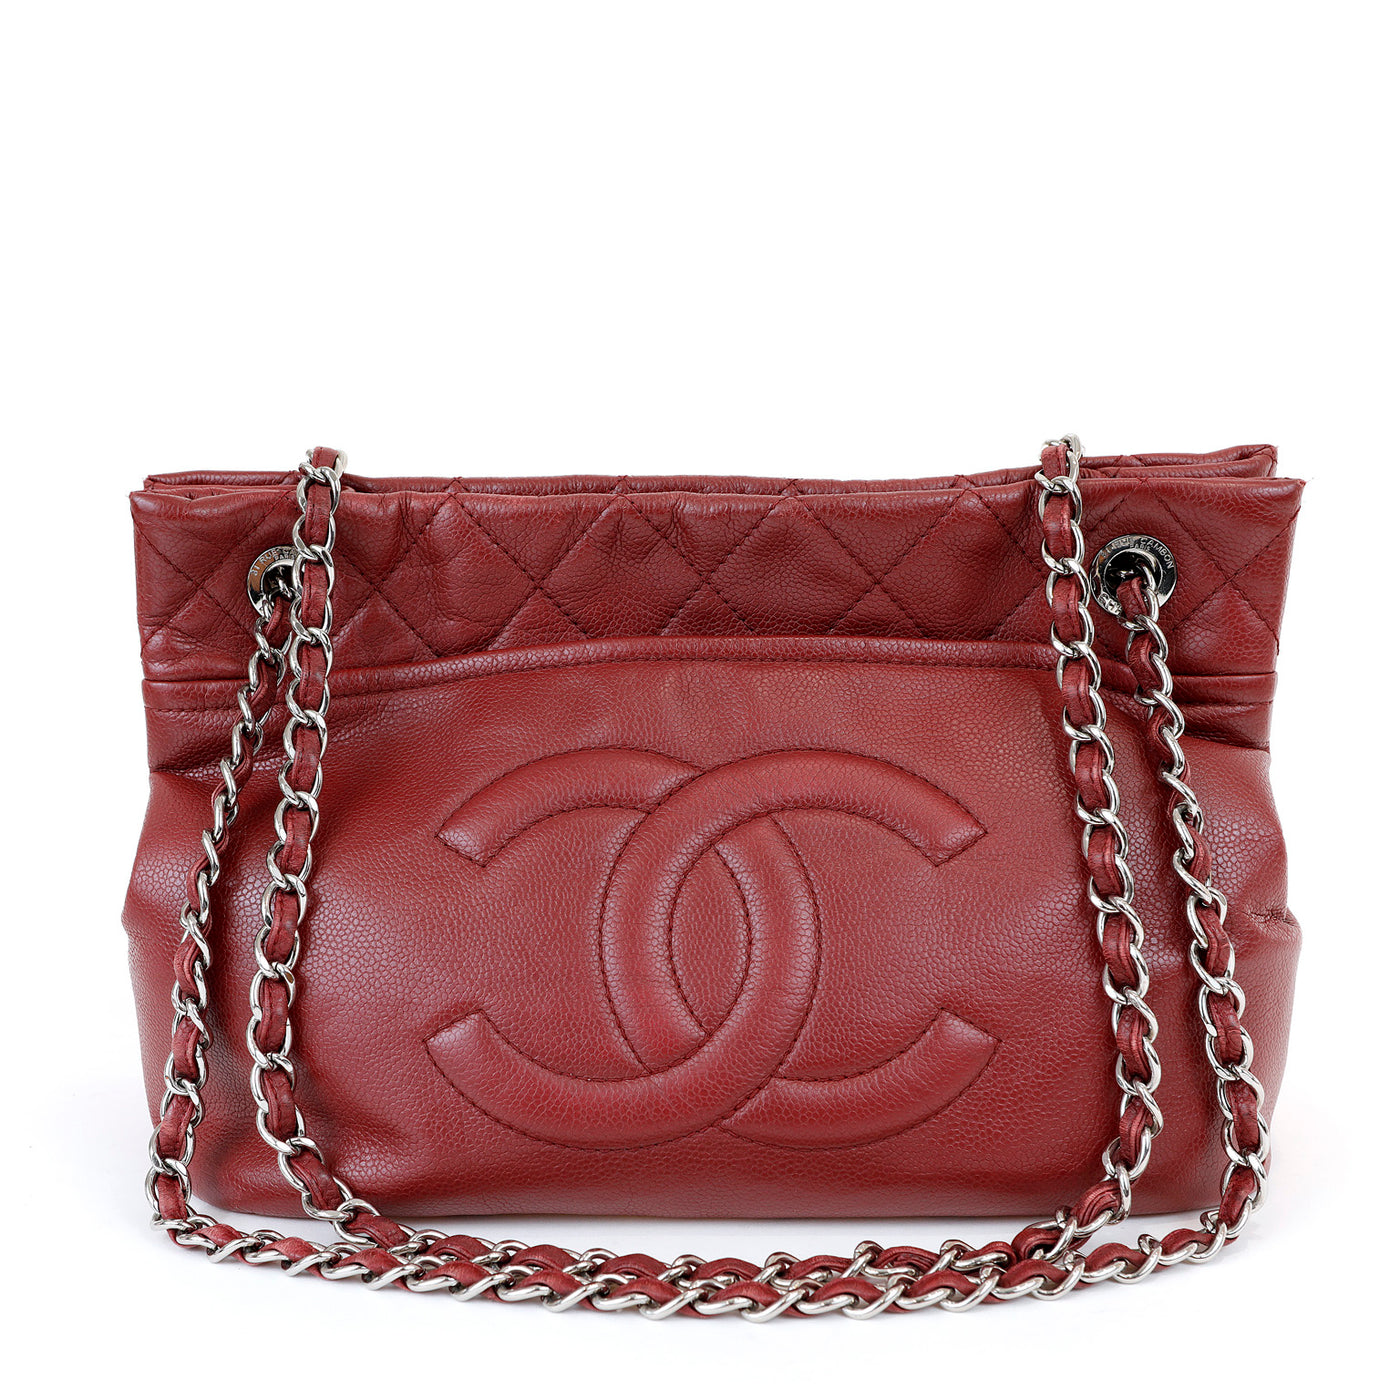 Chanel Red Caviar Leather Tote w/ Silver Hardware